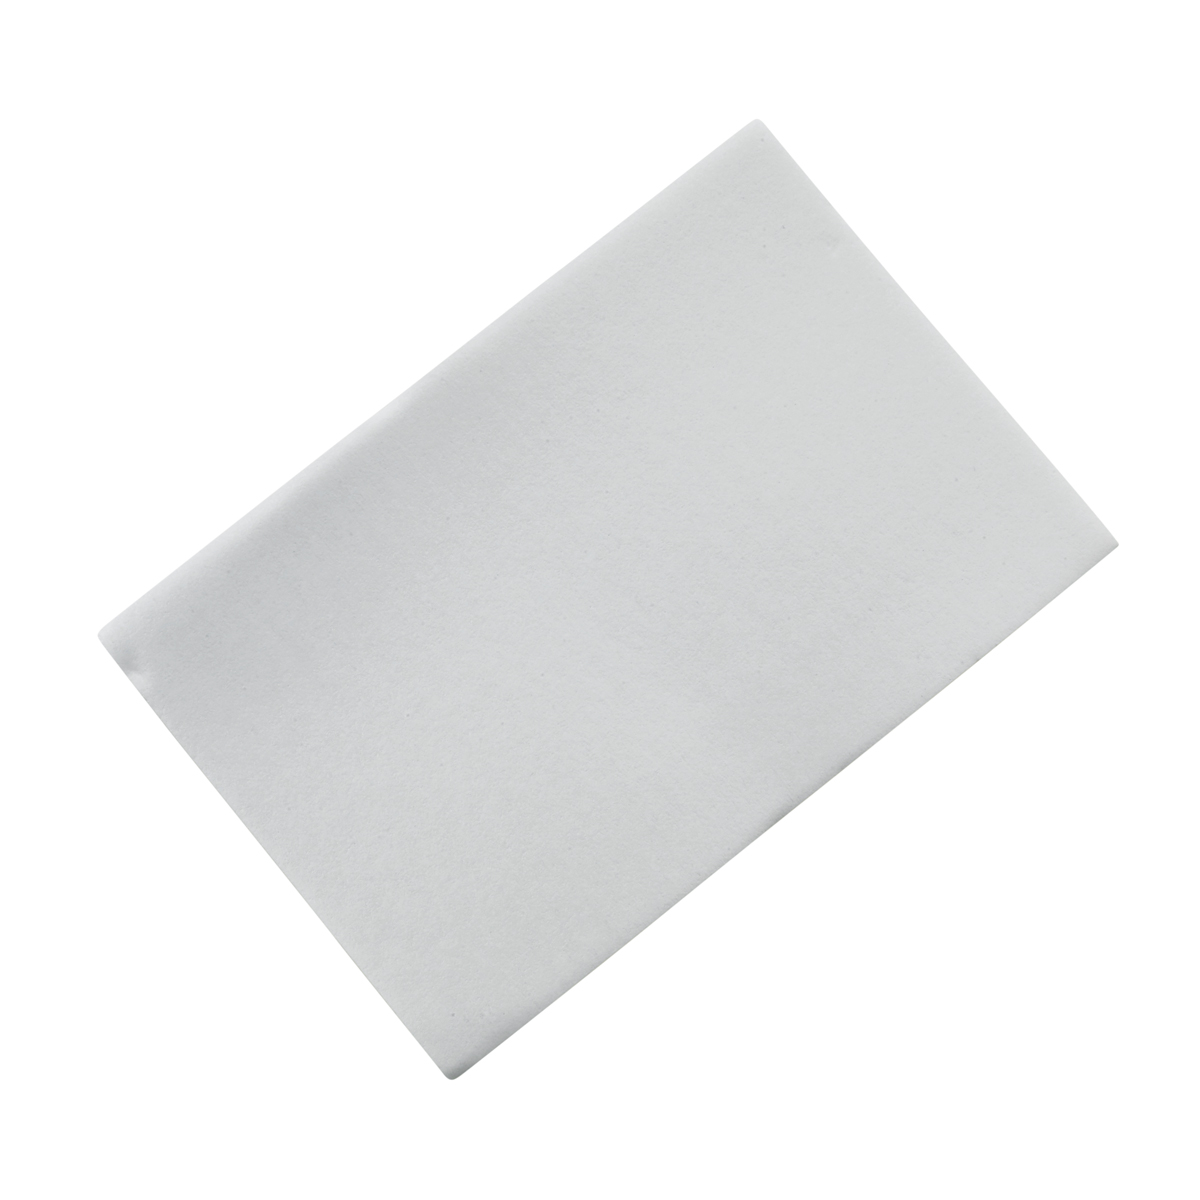 MOUNTING PAD DOUBLE SIDED 3 .in X2 .in